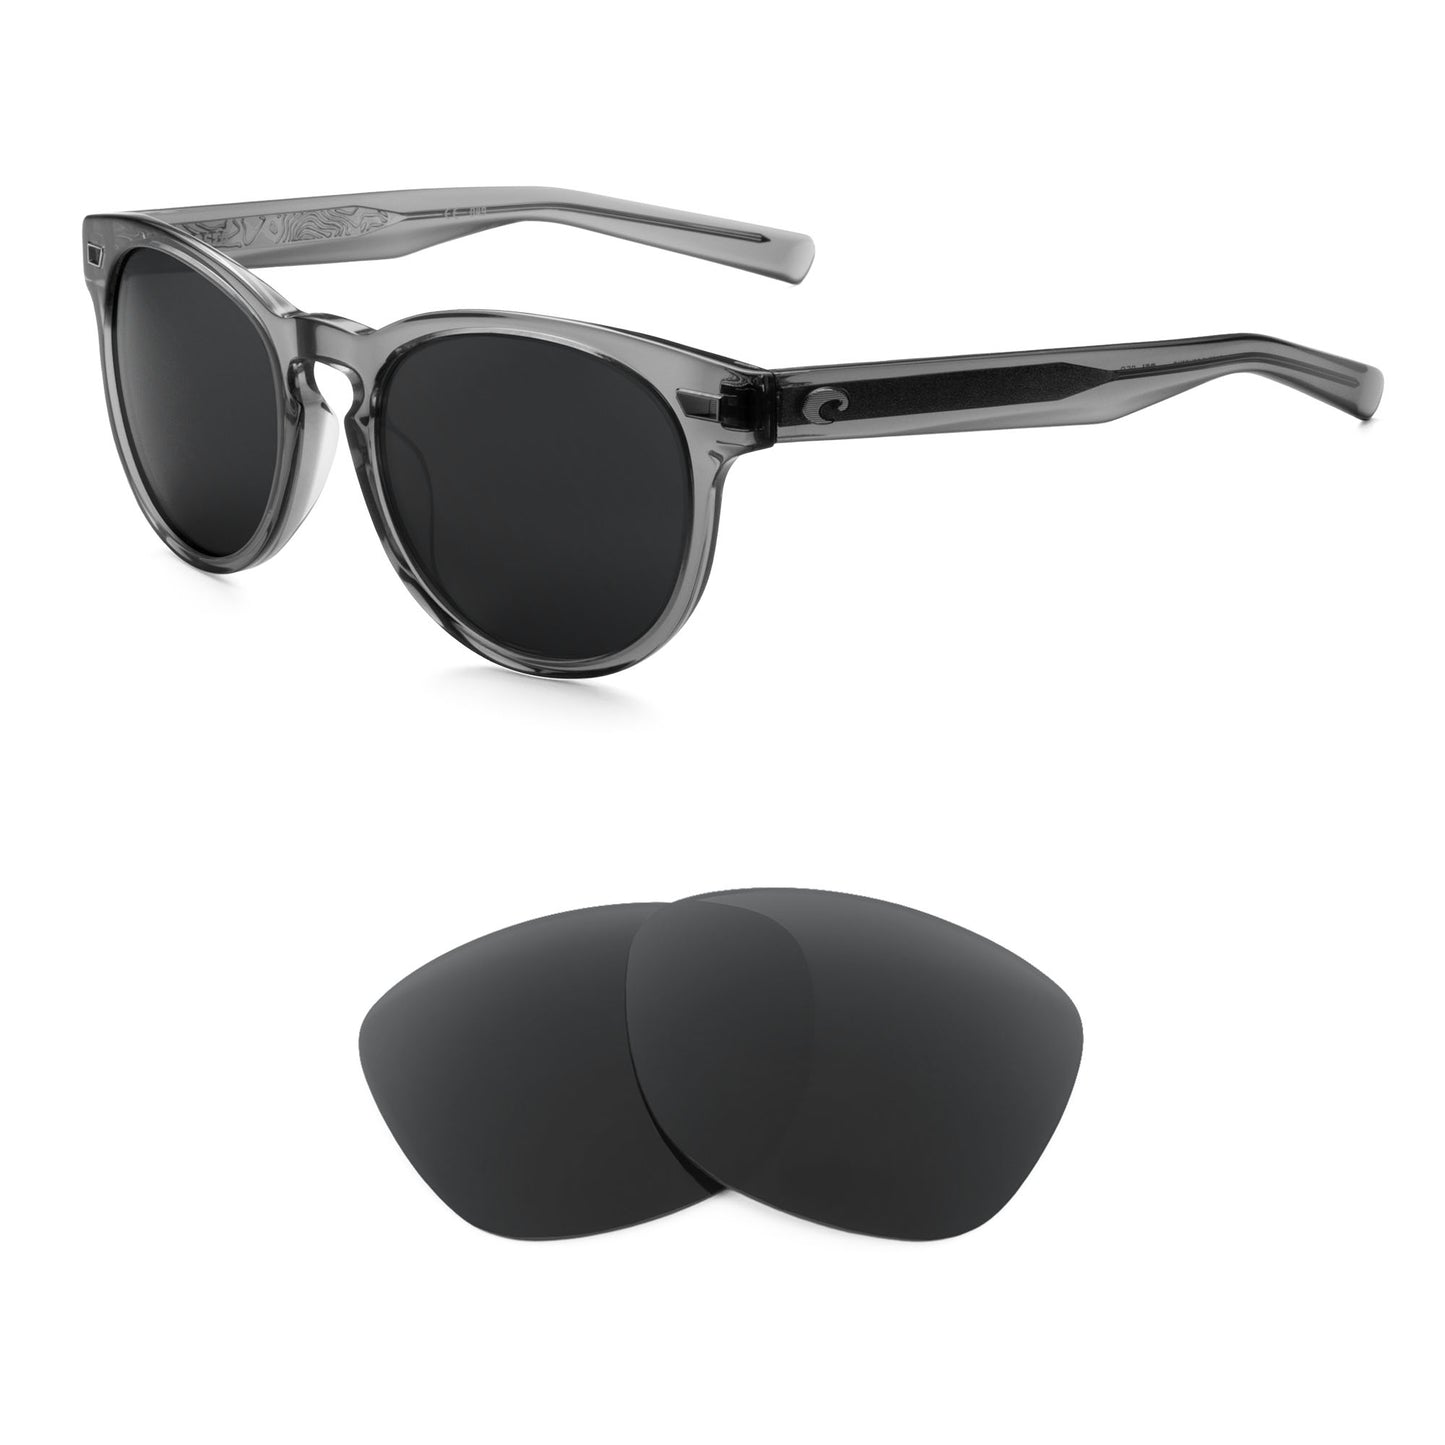 Costa Del Mar sunglasses with replacement lenses